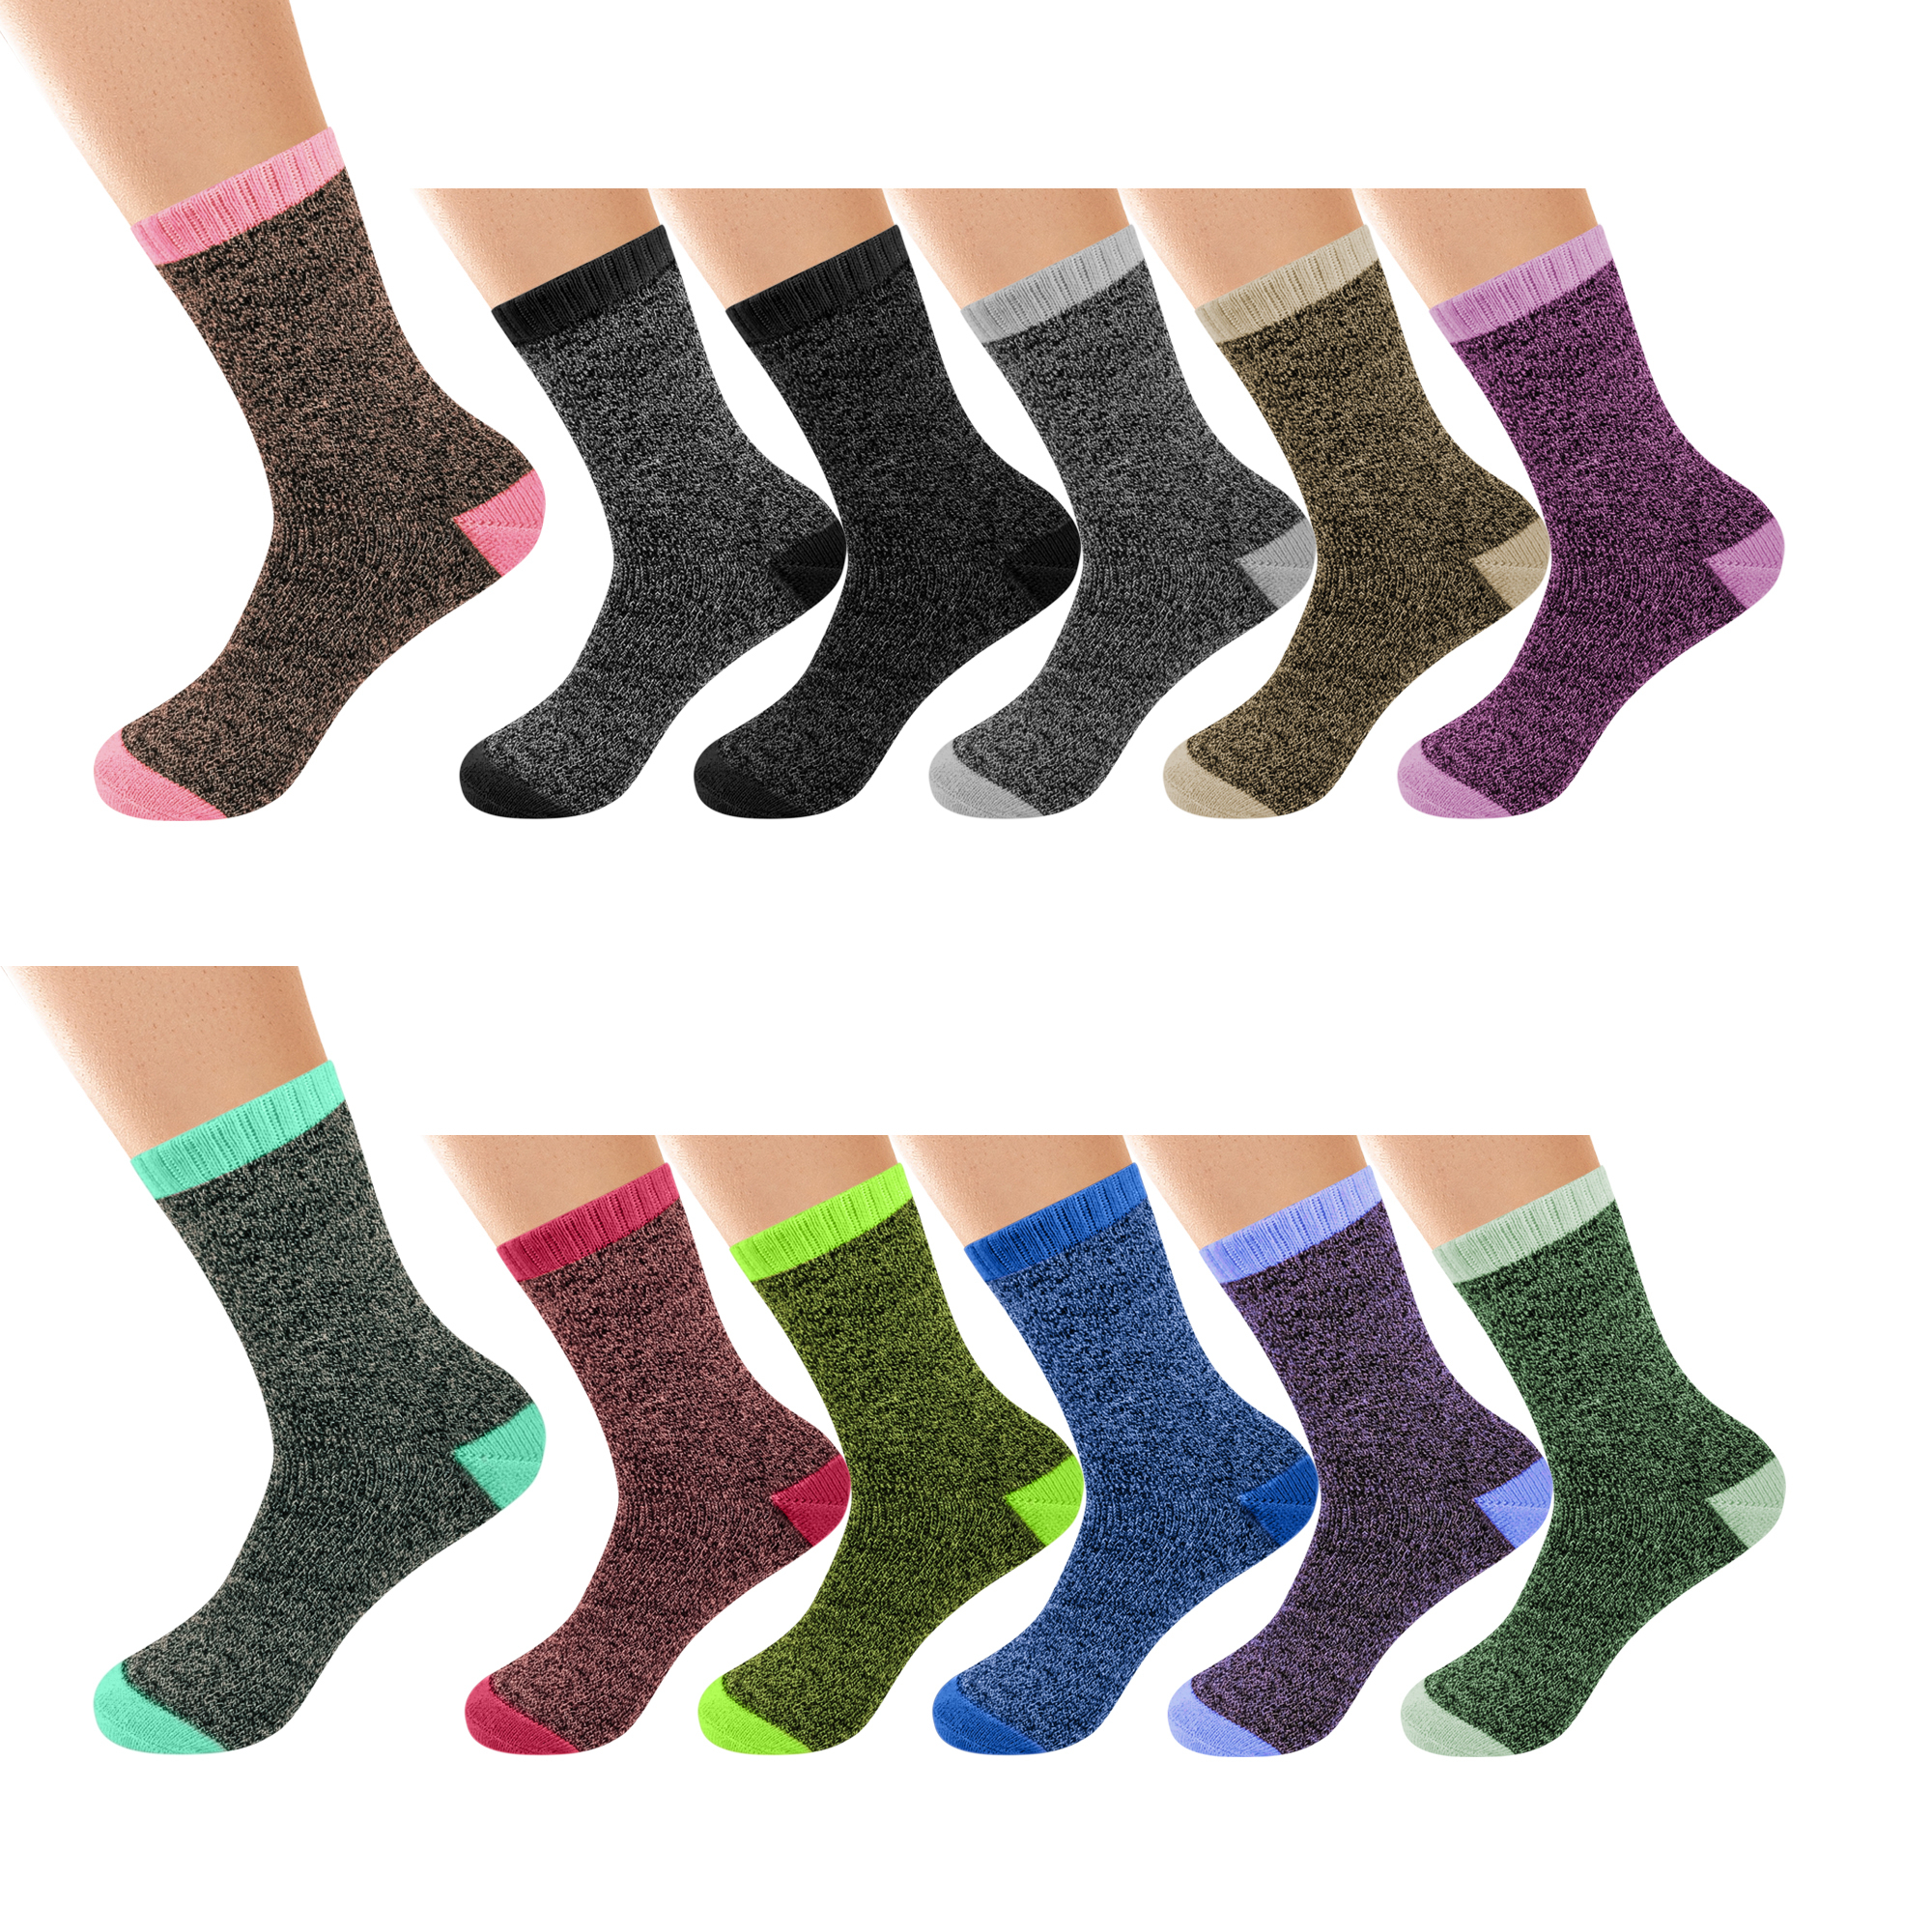 12-Pairs: Women's Winter Warm Thick Soft Cozy Thermal Boot Socks